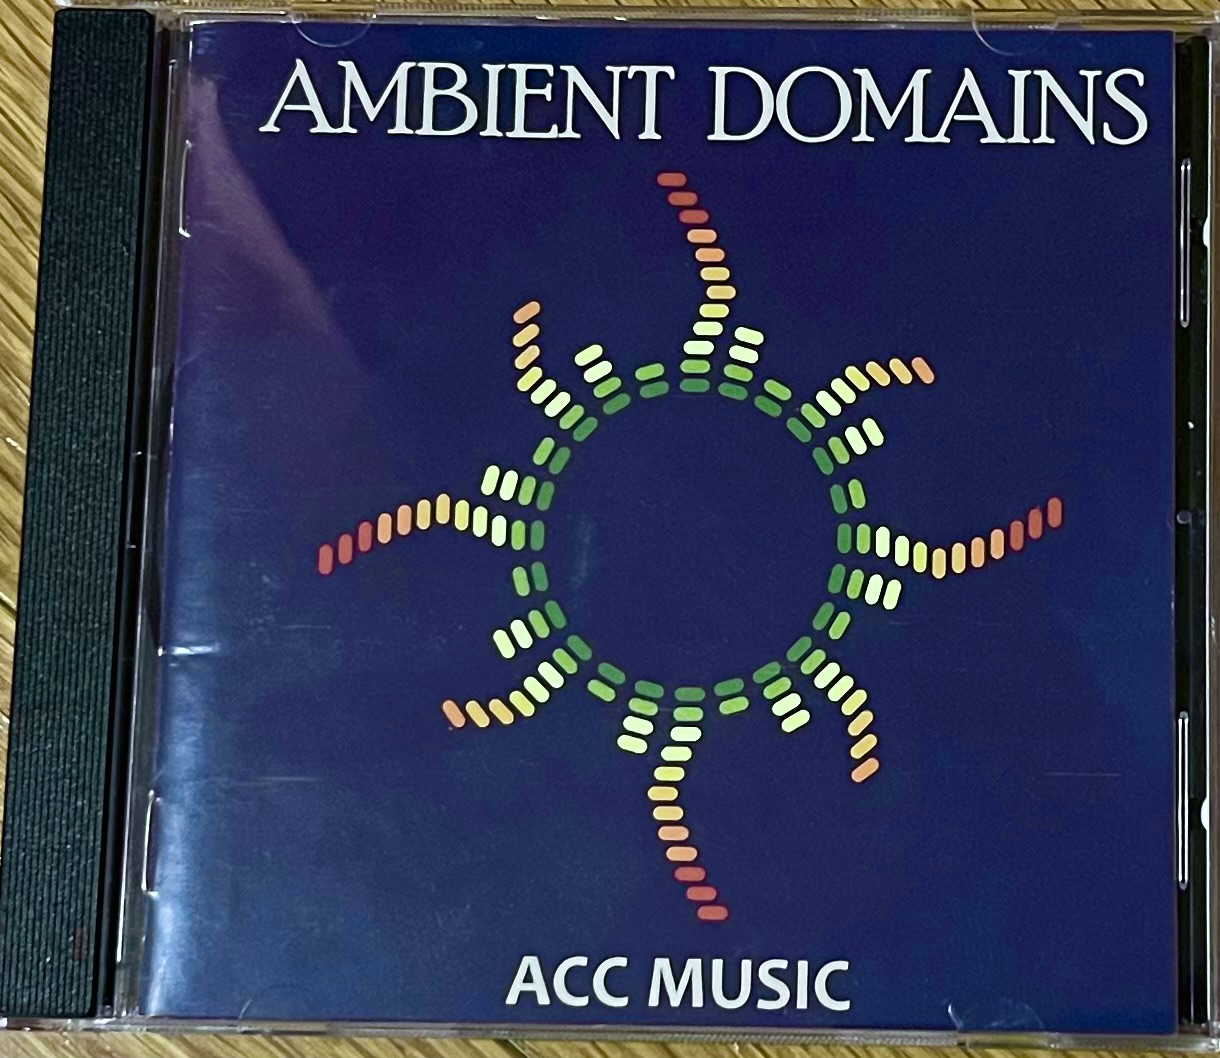 ACC is releasing their first ever CD “Ambient Domains